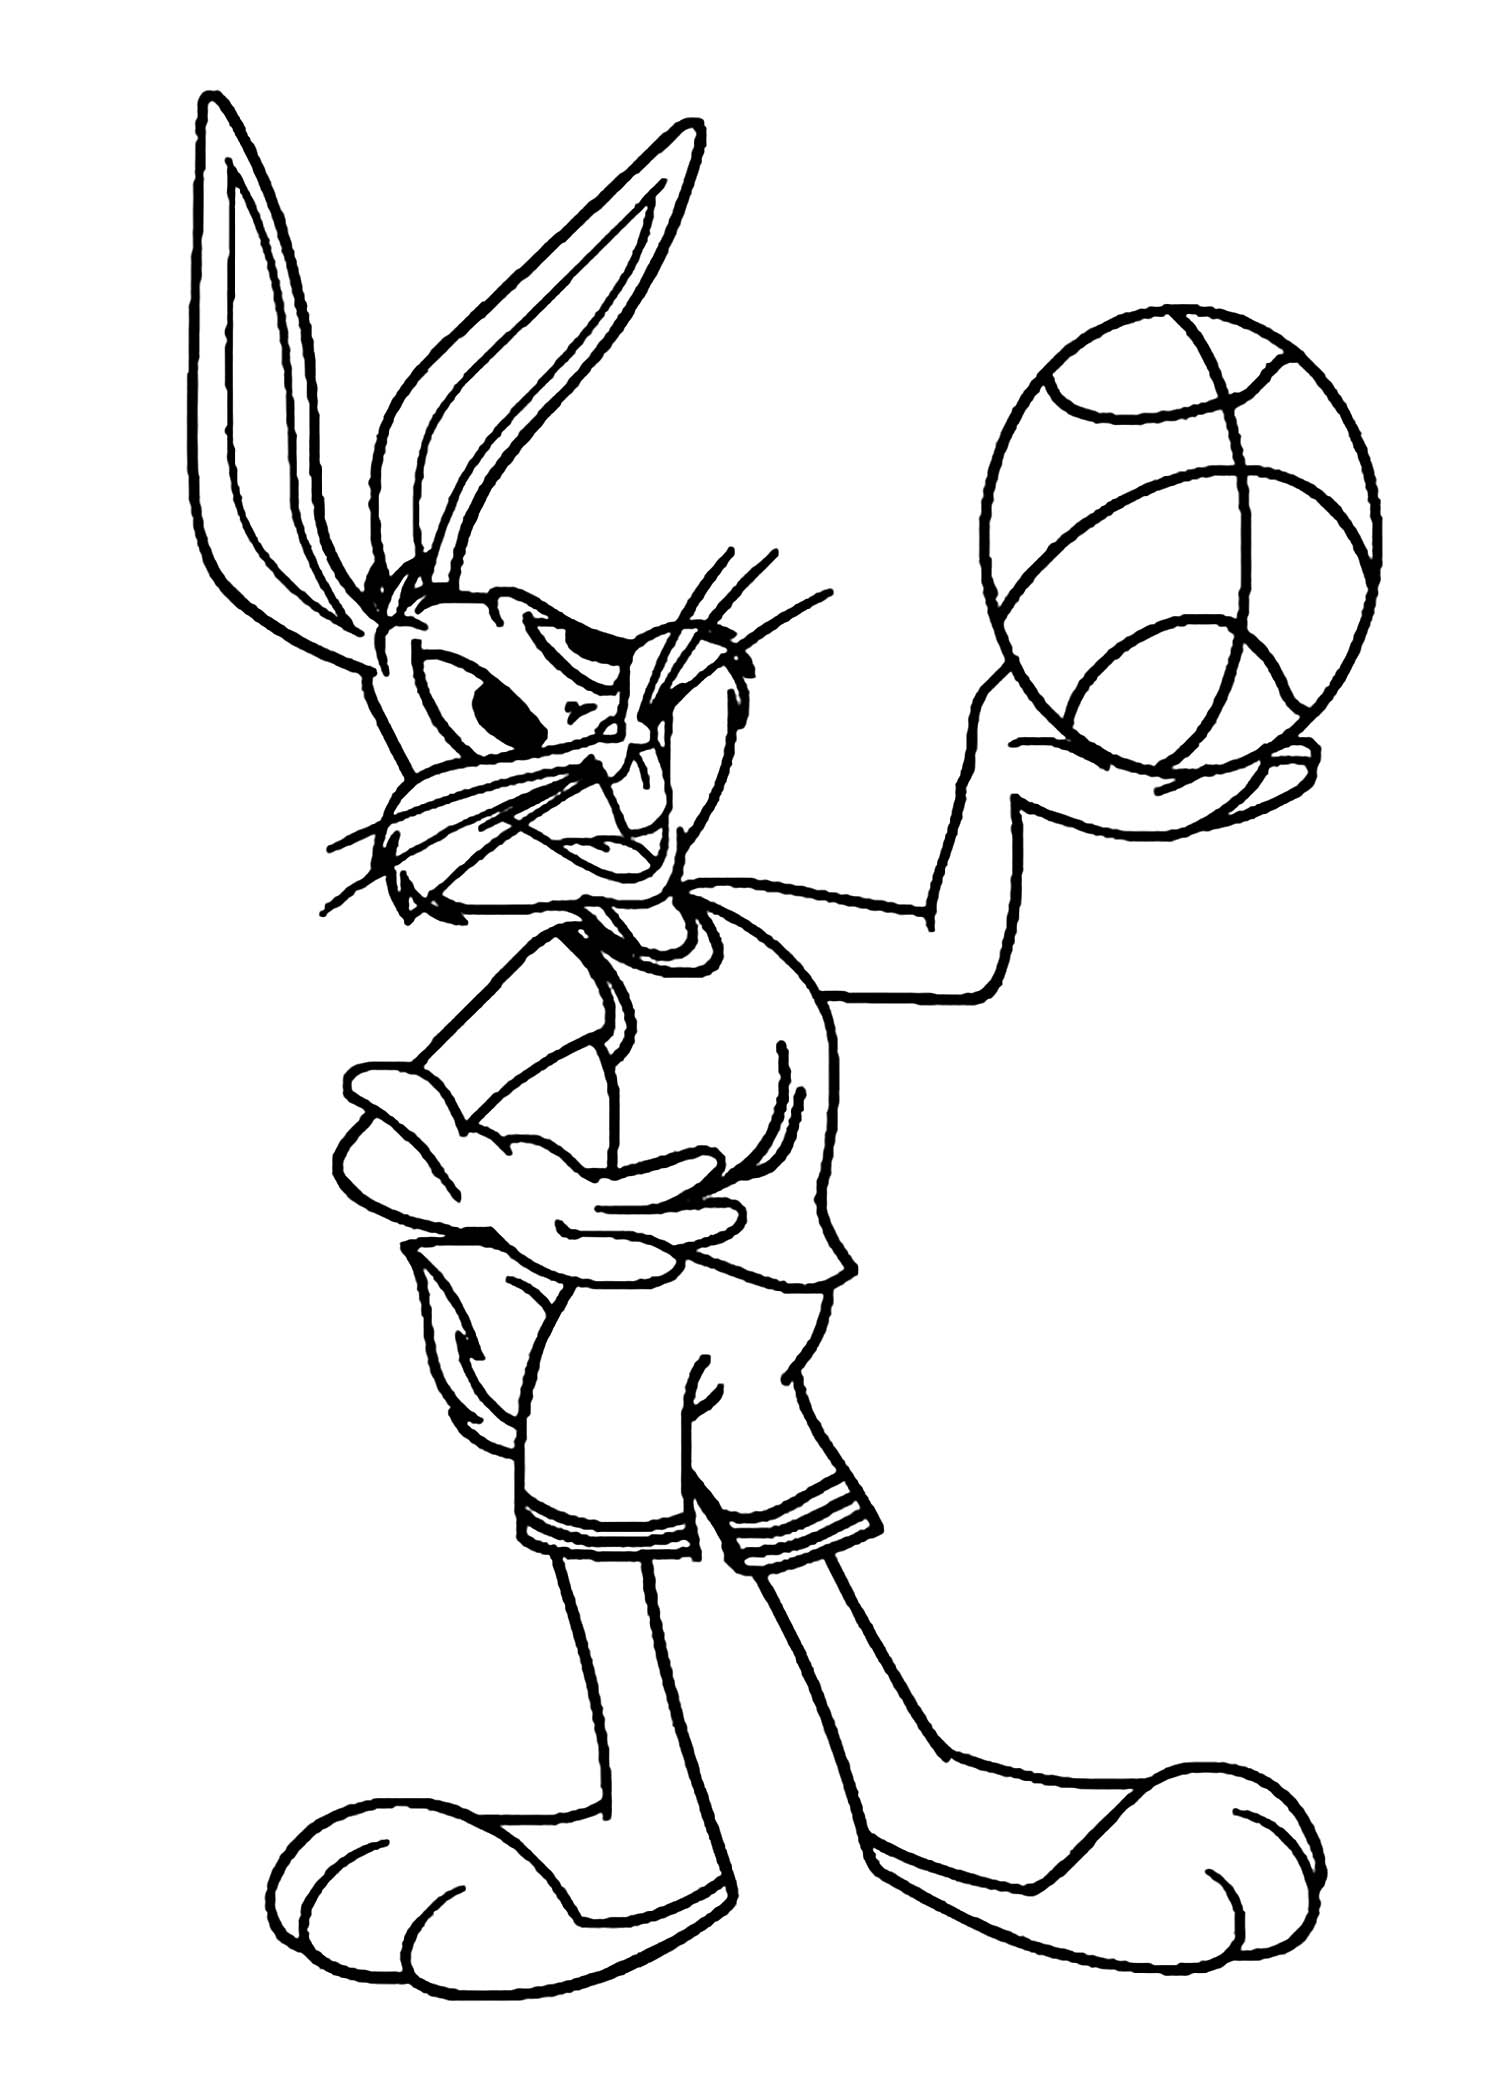 free-basketball-coloring-pages-to-print-basketball-kids-coloring-pages